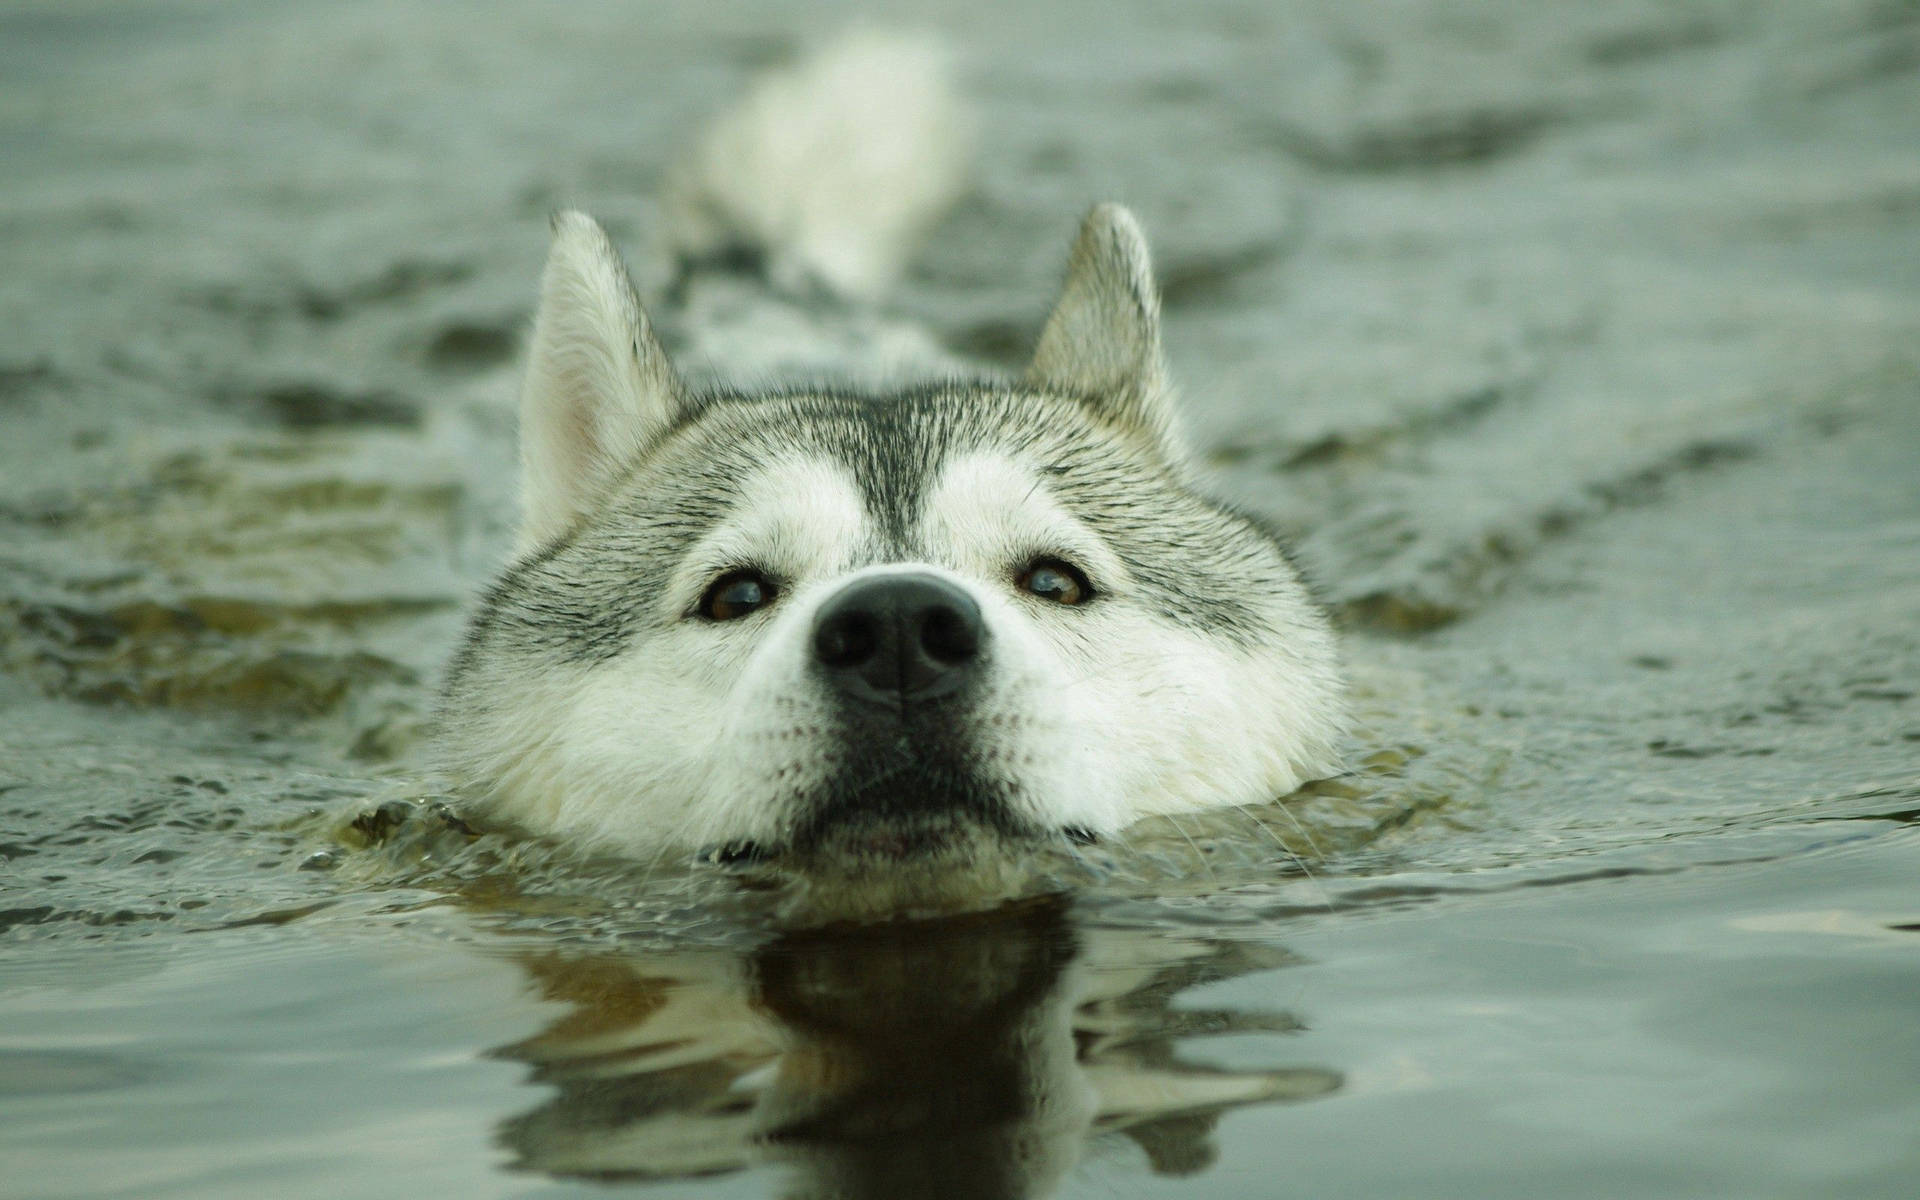 "Take a Dip - This Husky Is Having the Time of Its Life" Wallpaper